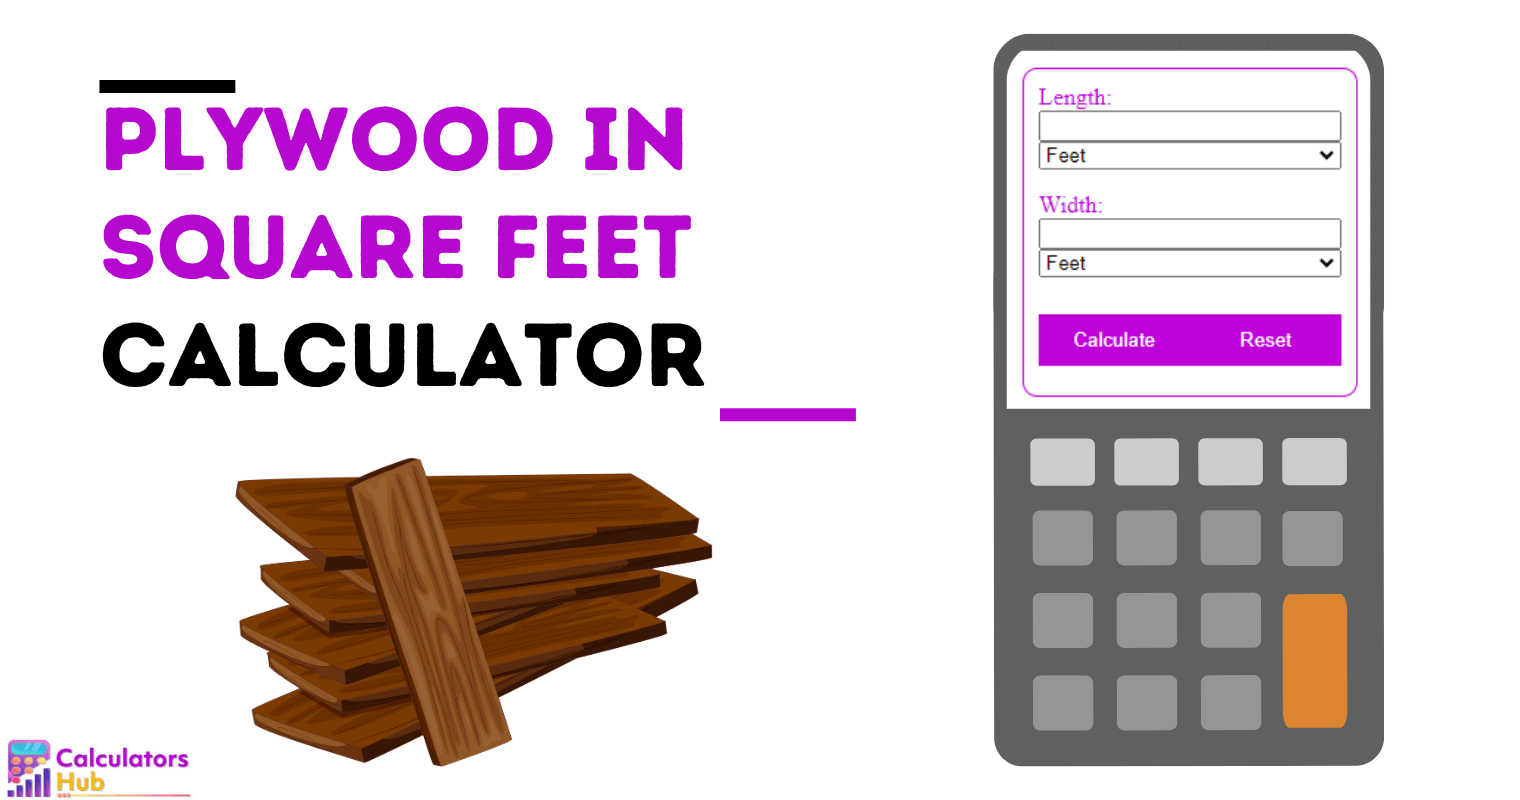 Plywood in Square Feet Calculator